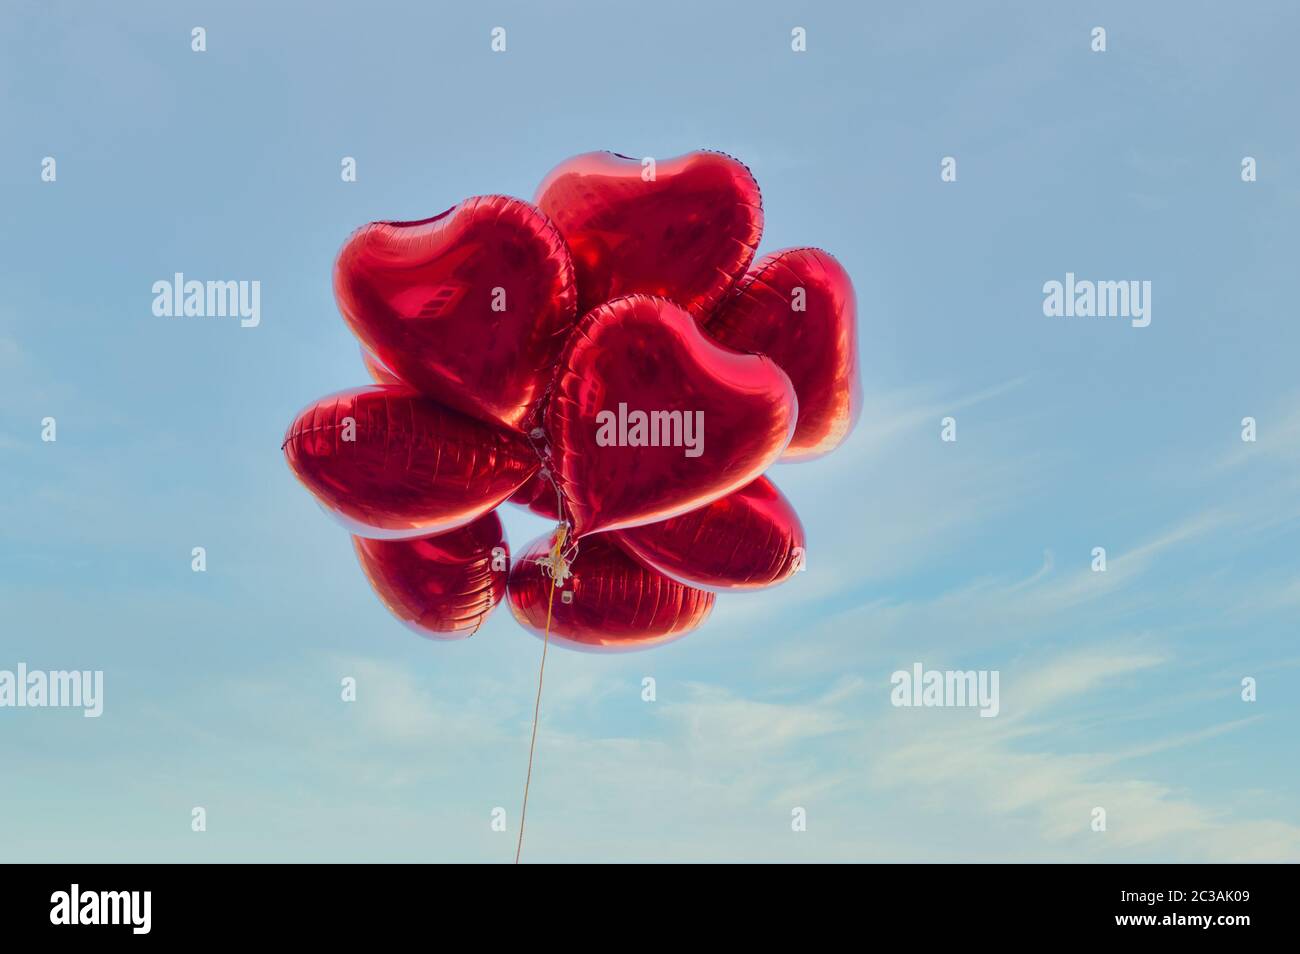 Group of heart shaped red air baloon on blue sky with clouds. Valentine's day and romance concept. Stock Photo